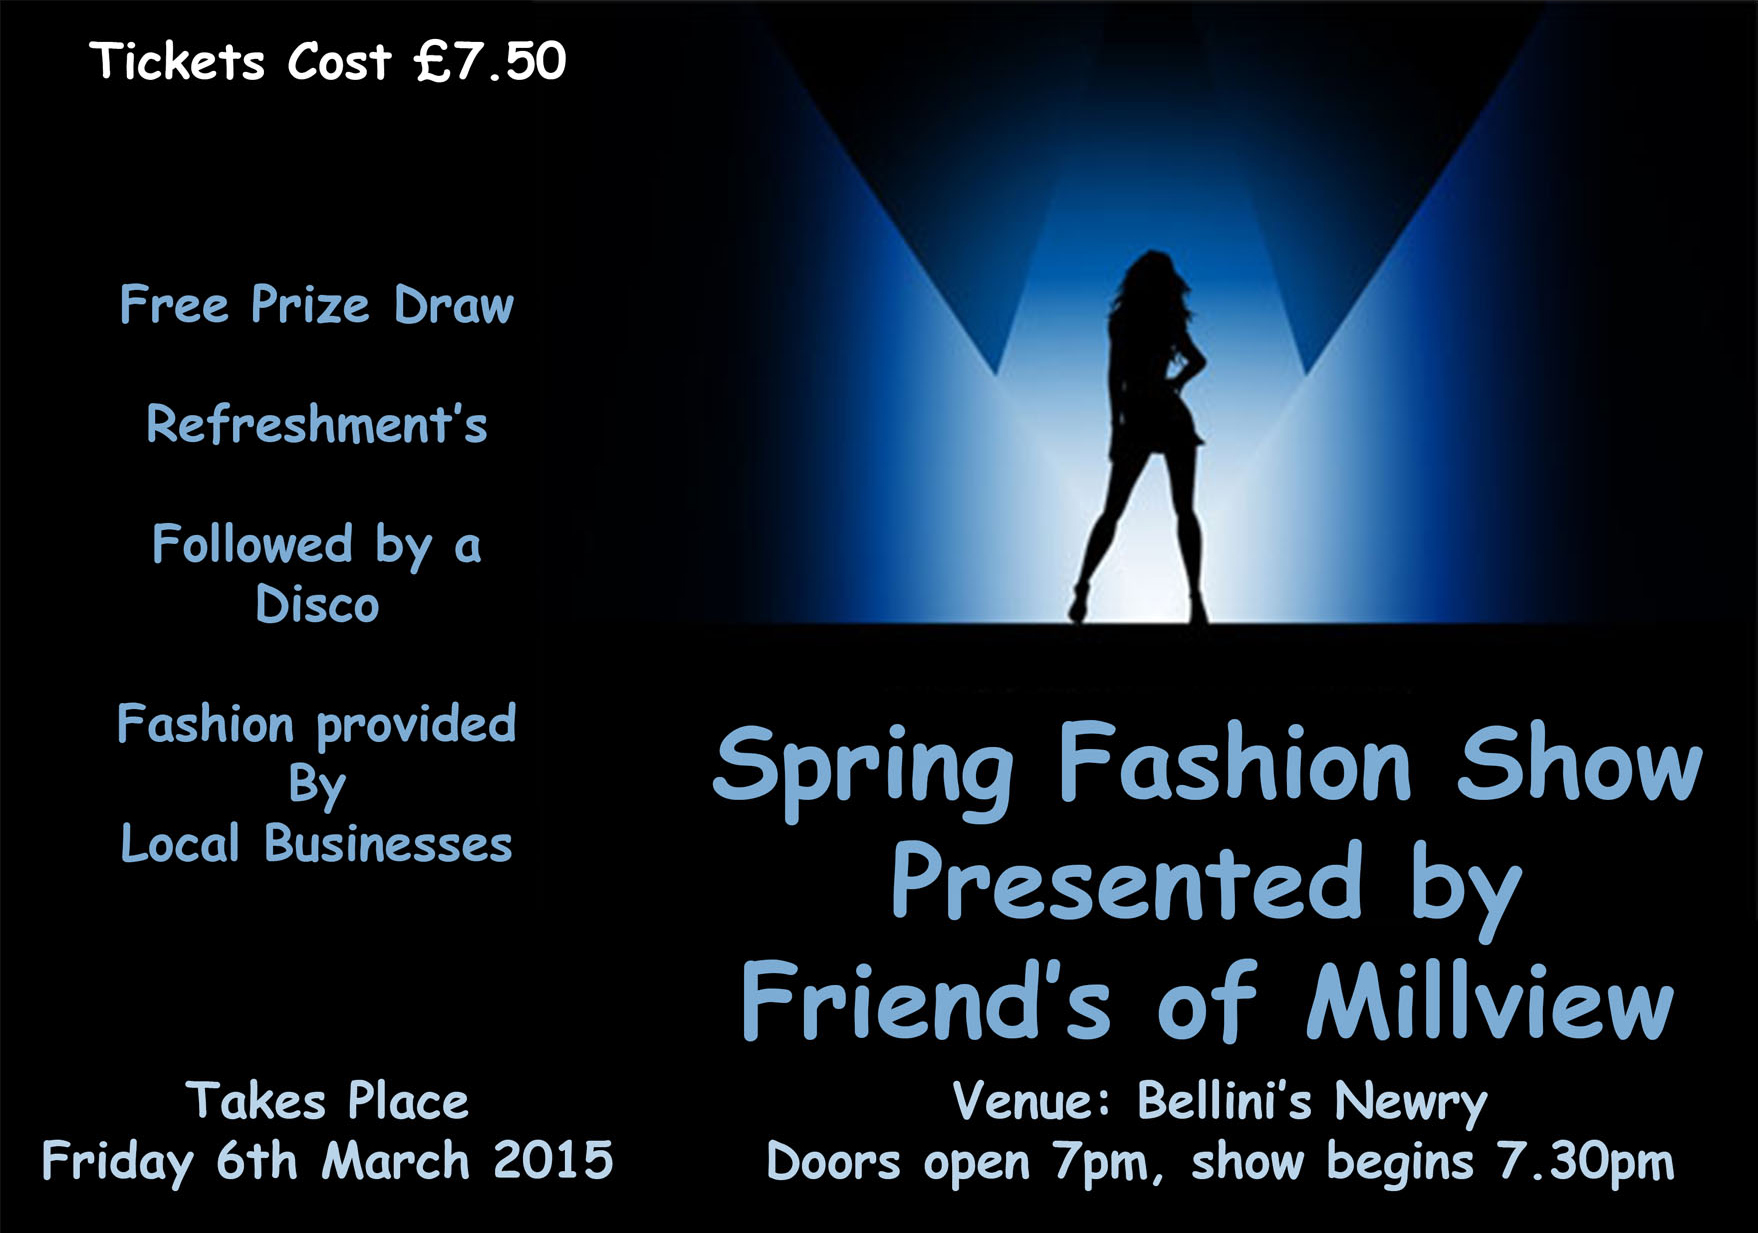 Friends of Millview Spring Fashion Show